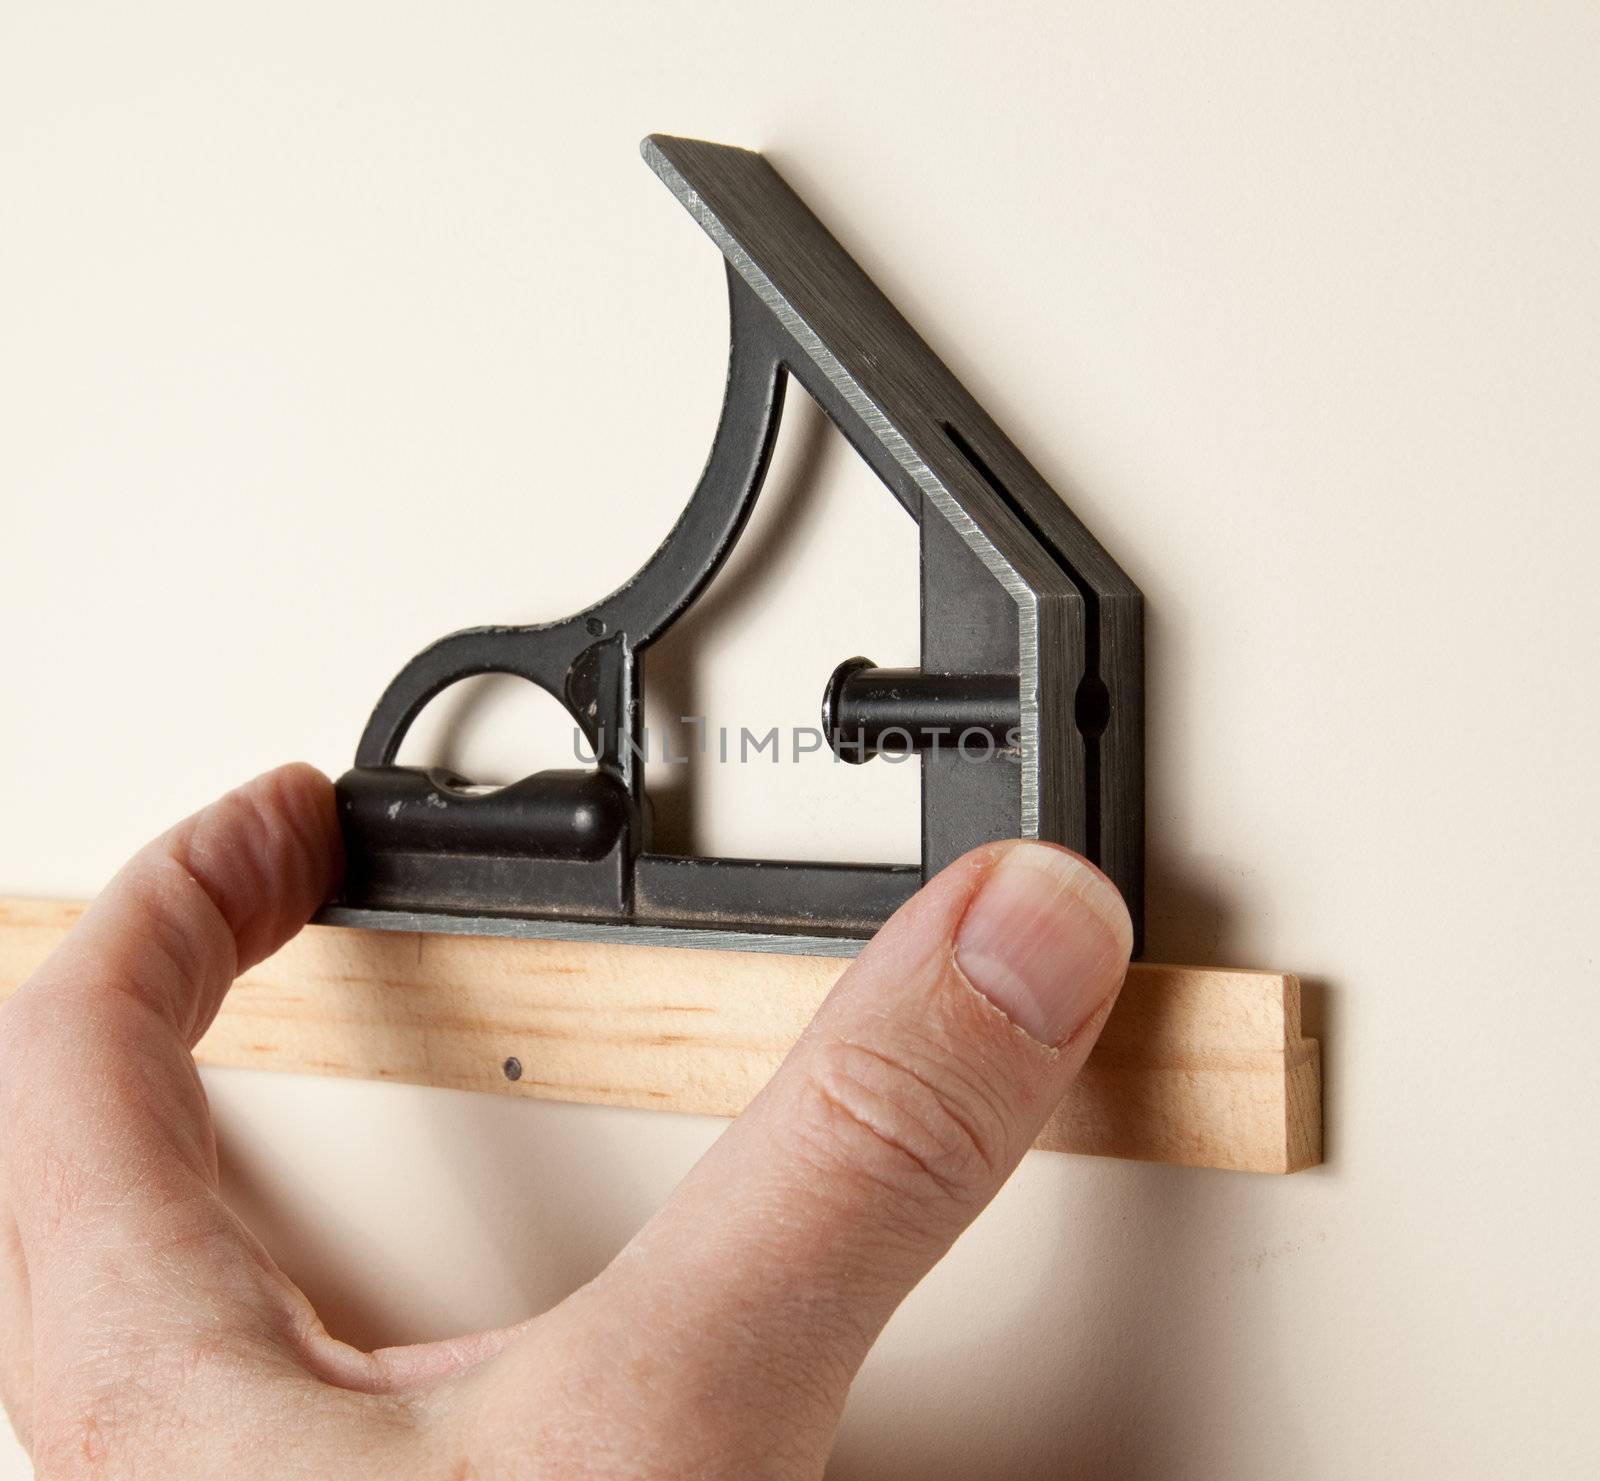 Using a triangular leveling tool to level a piece of wood on wall